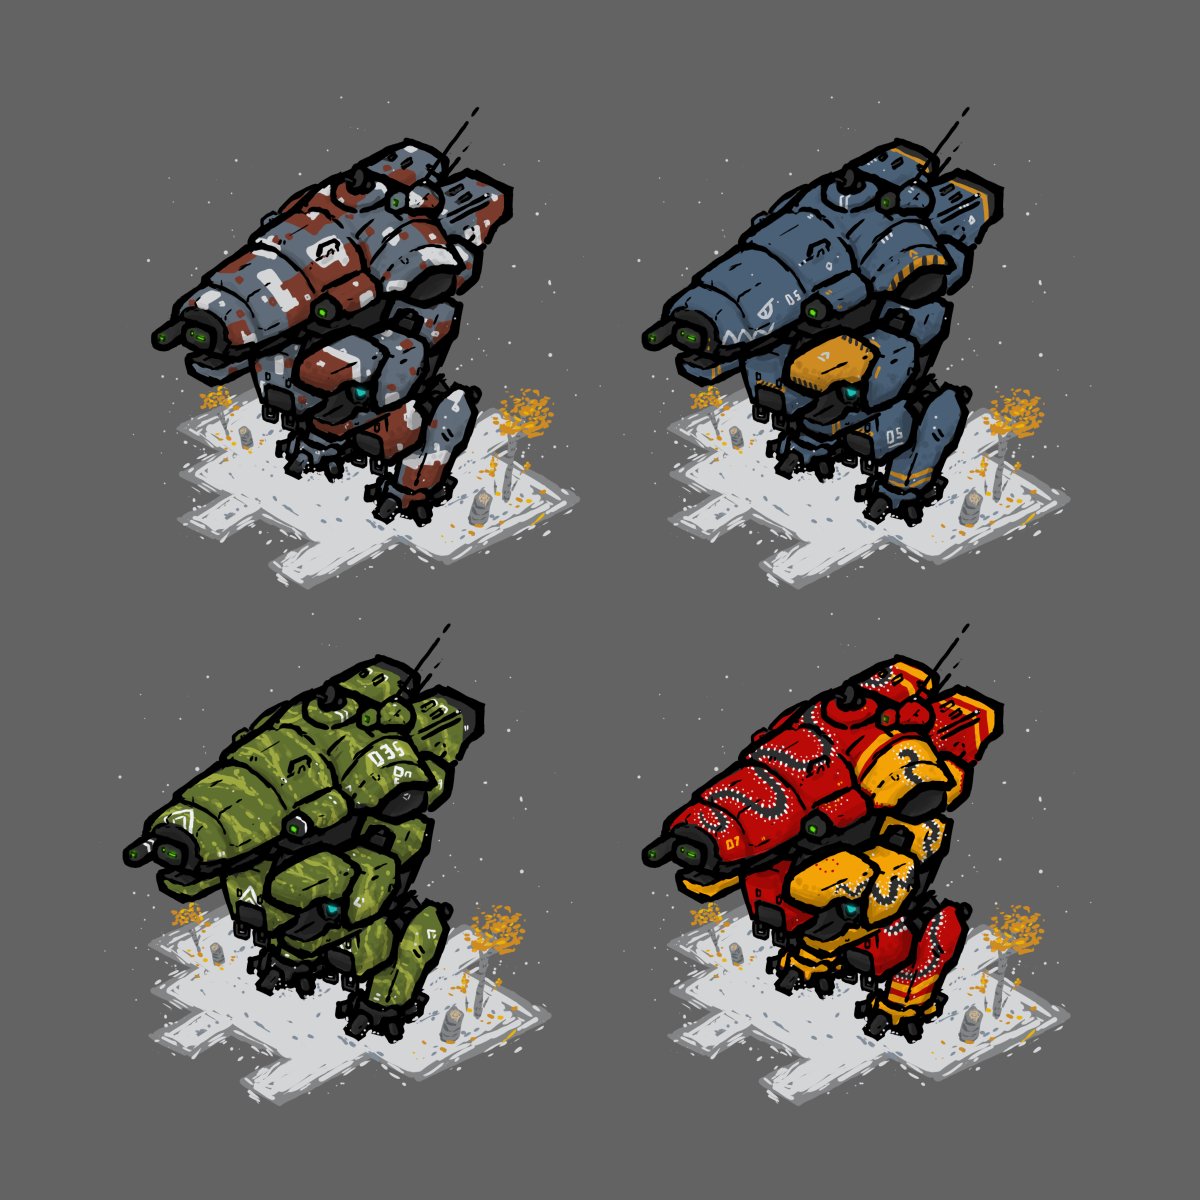 Isometric Crab from Battletech